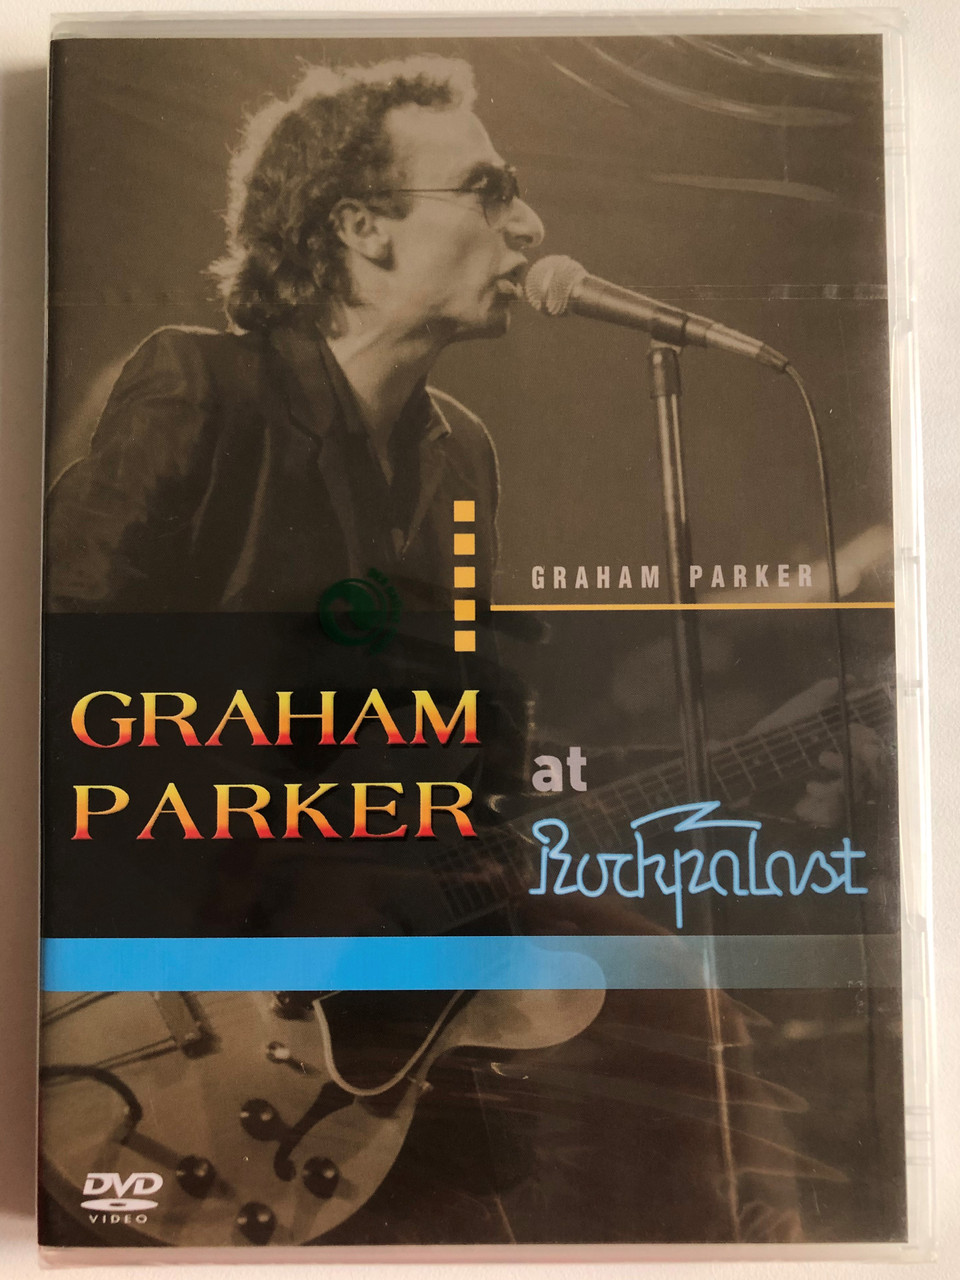 Graham_Parker_At_Rockpalast_Concerts_First_GRAHAM_PARKER_THE_RUMOUR_1978_at_the_WDR-Grugahalle_Essen_Studio_L_Second_Grugahalle_Essen_Studio_L_18_October_1980_DVD_2__01167.1692157142.1280.1280.JPG (960×1280)